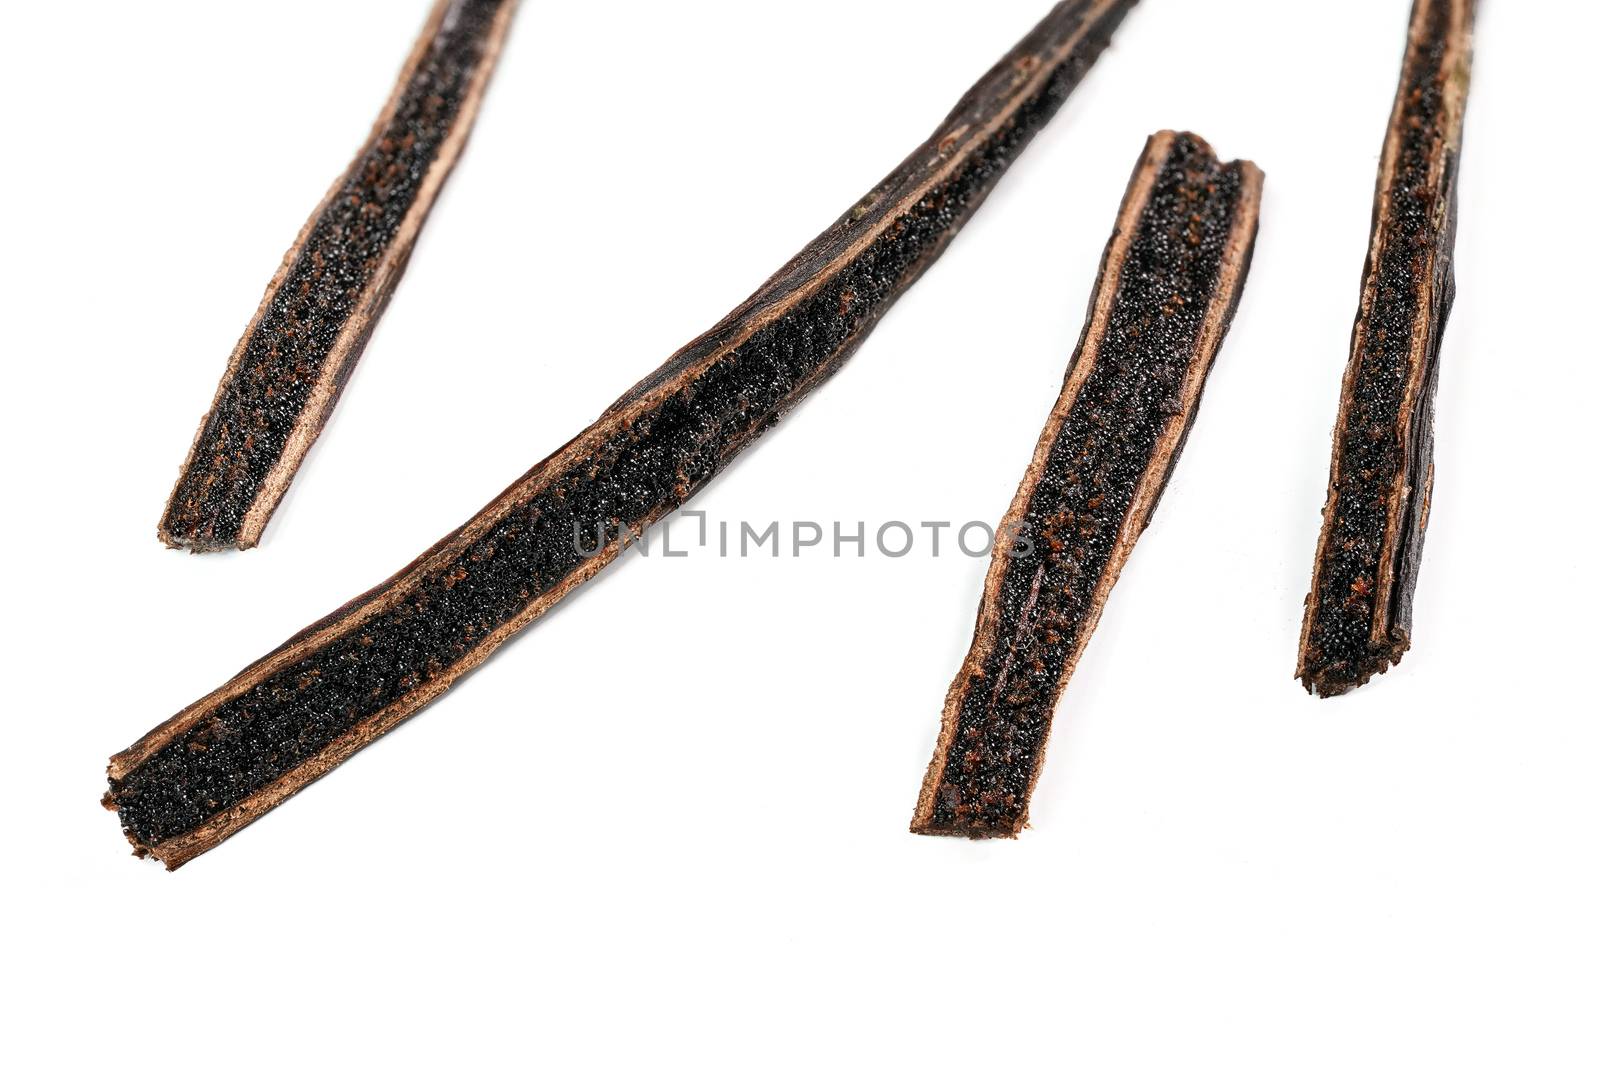 Vanilla pods cut with knife, black seeds visible, closeup macro detail photo isolated on white background by Ivanko